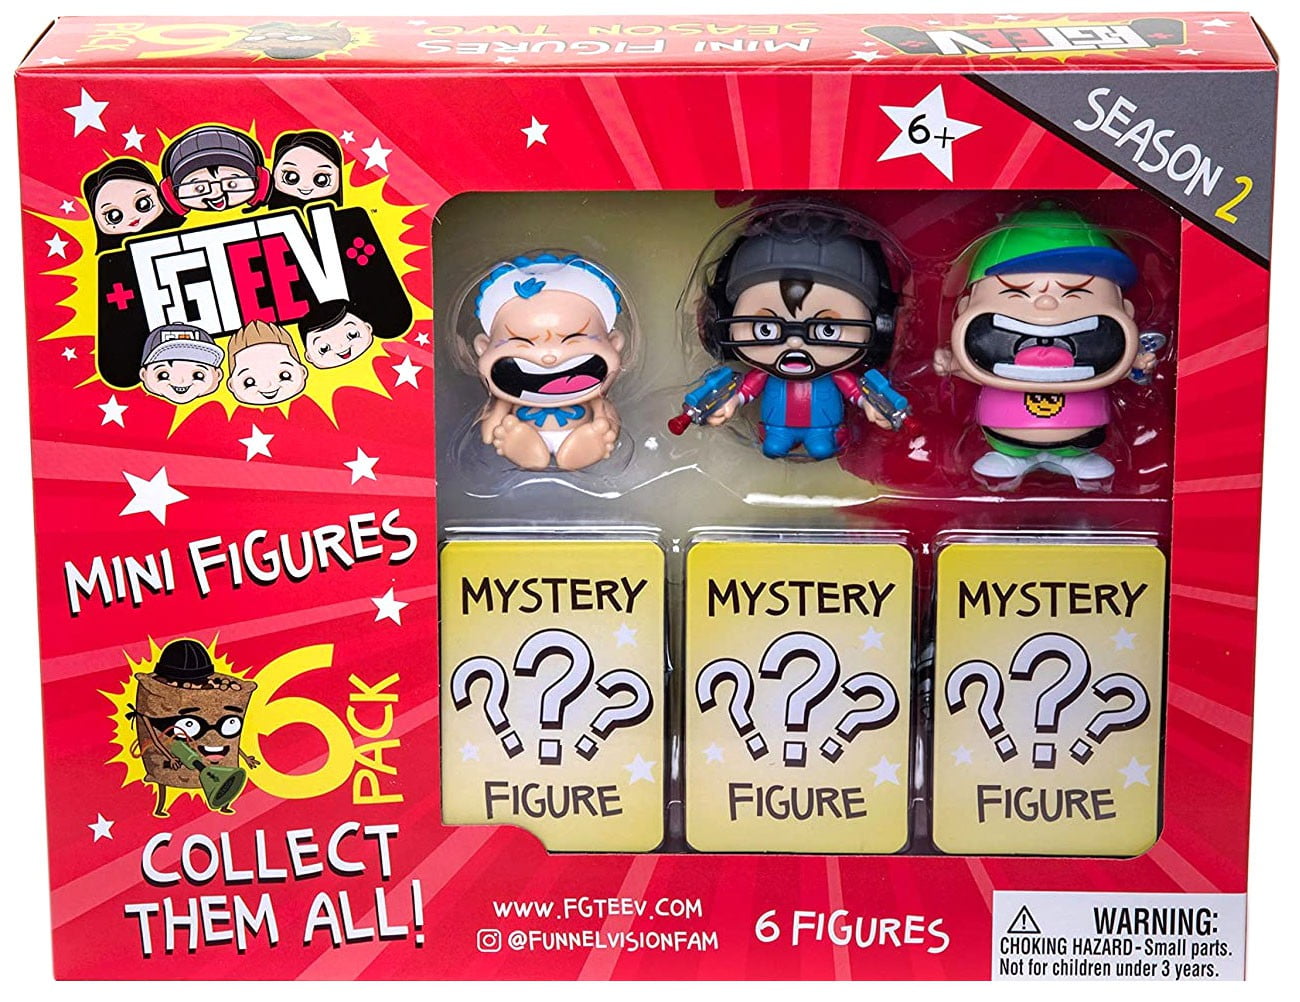 Lot of 3 Capsules FGTEEV Mystery Blind Bag Figures Season Two FREE SHIPPING NEW 